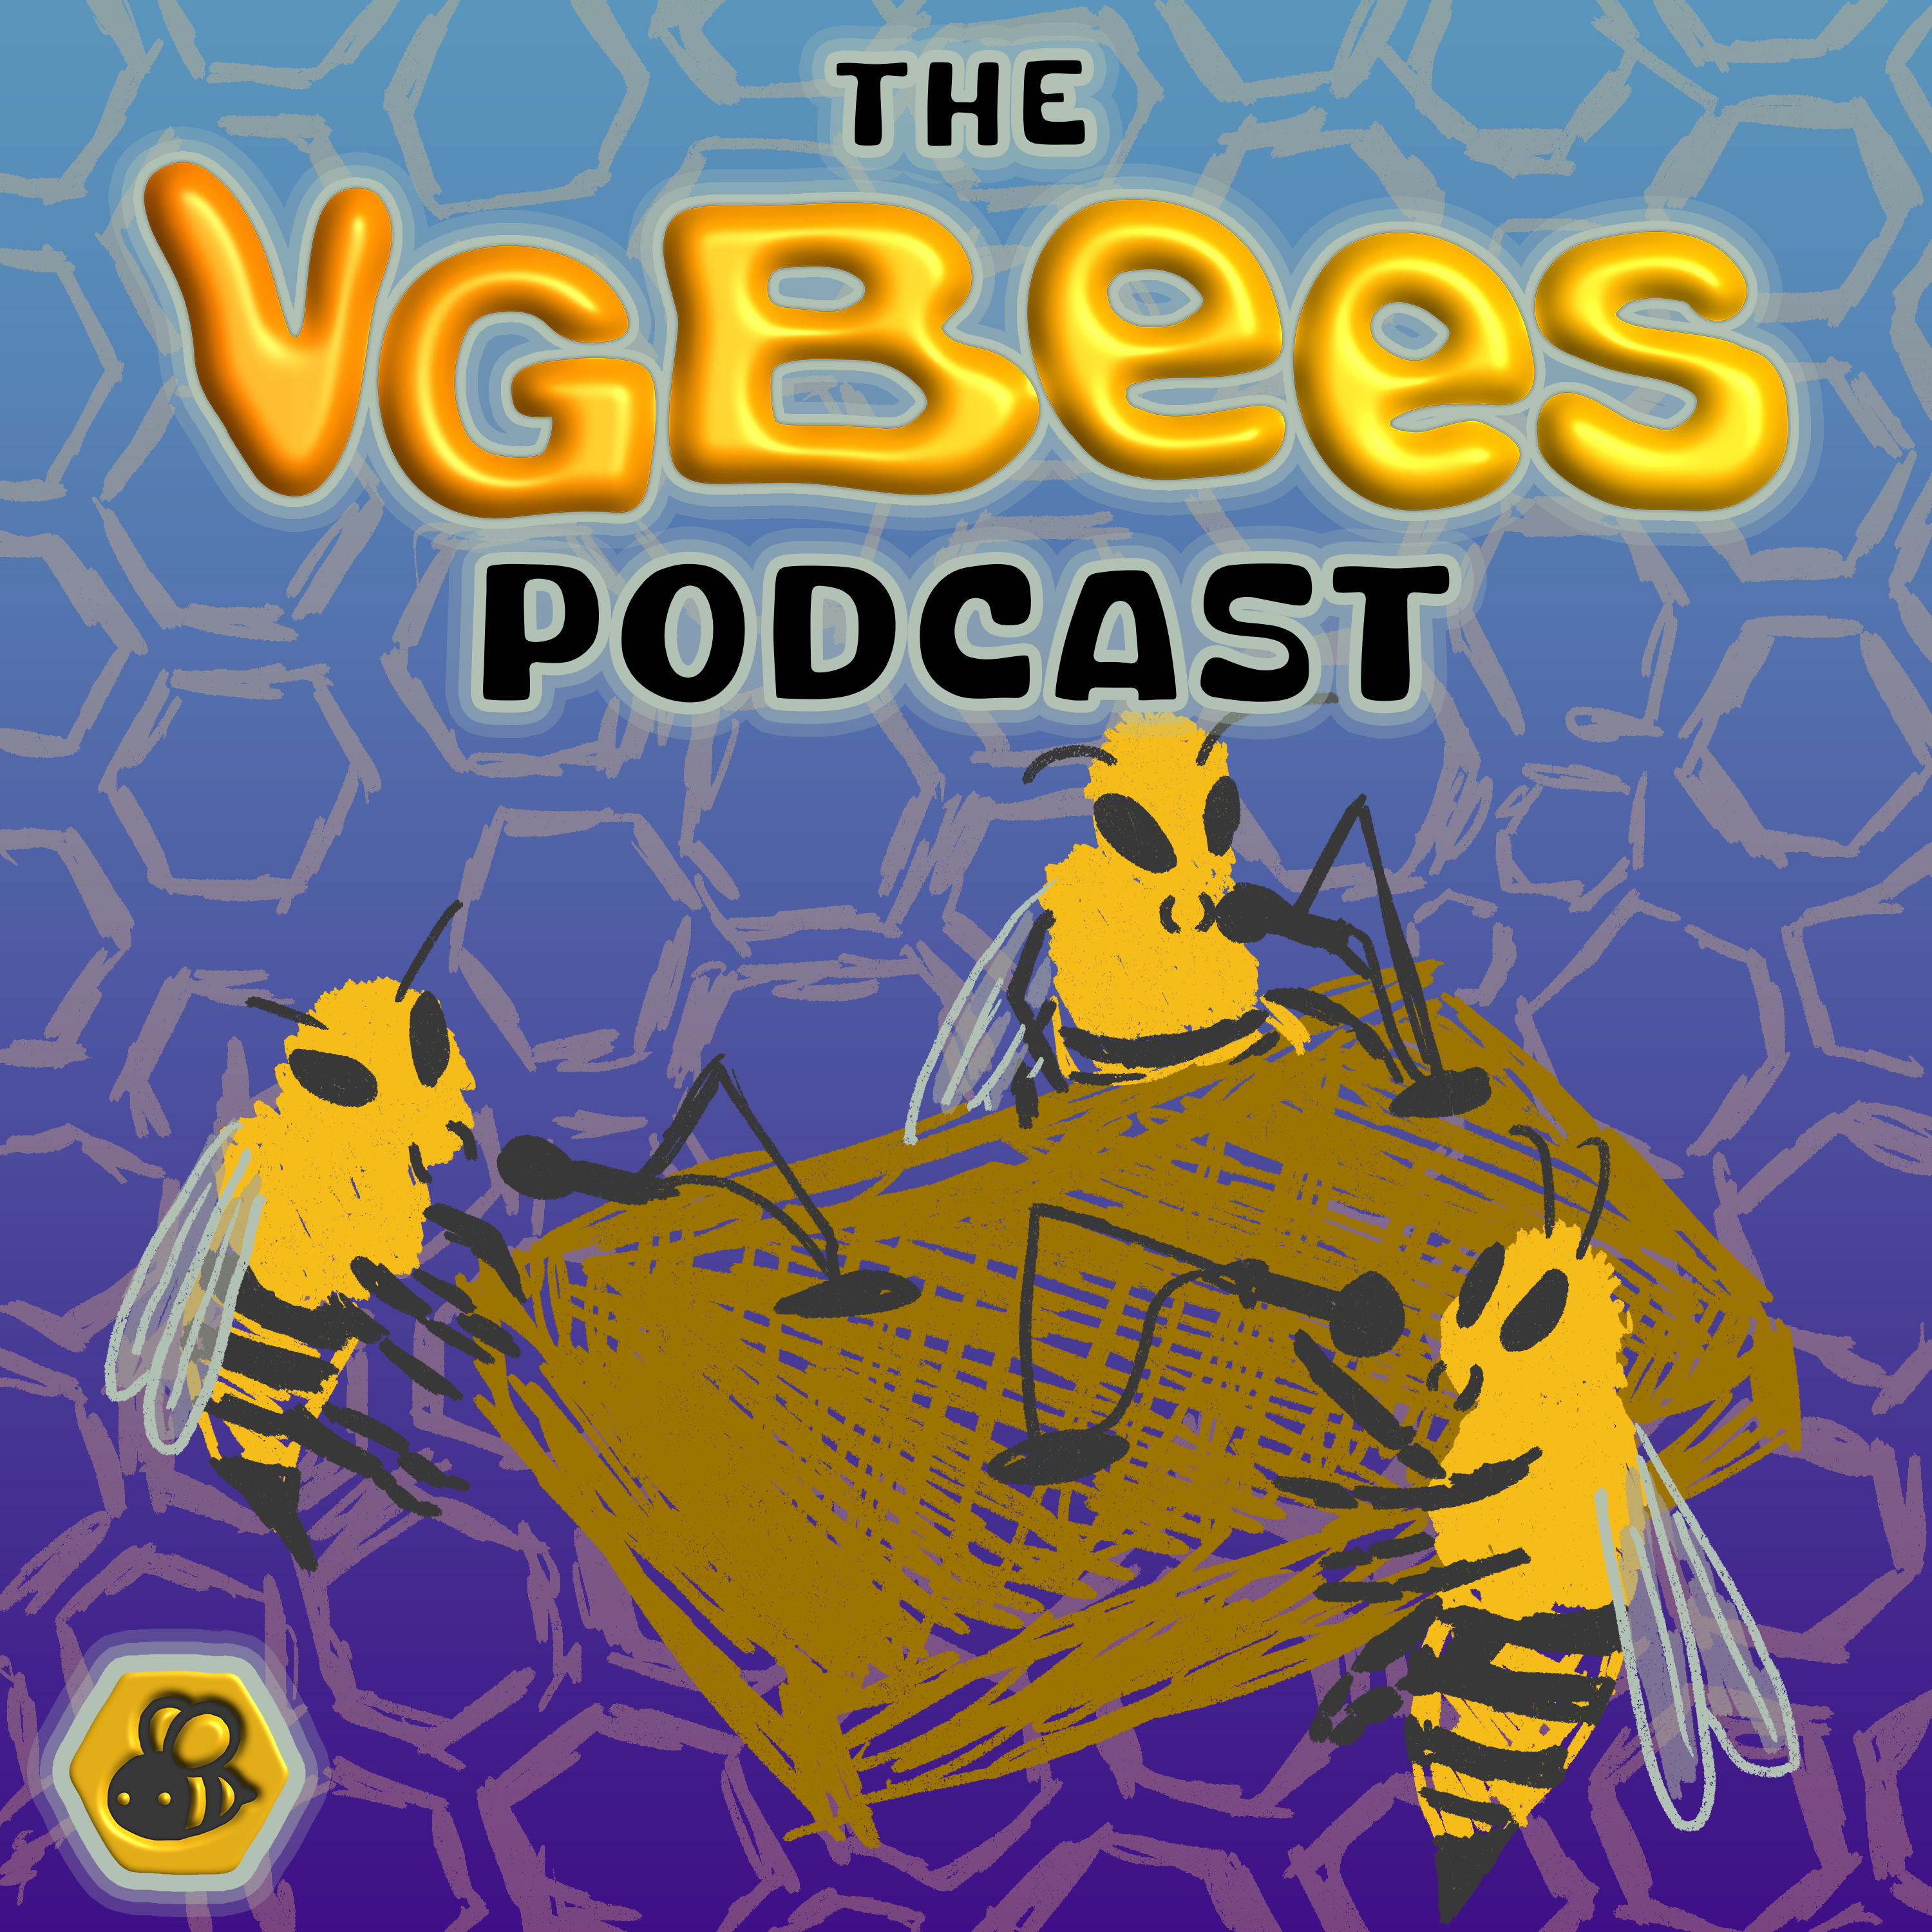 The VGBees Podcast – Episode 2: Consult Your Doctor Before Taking Veilguard